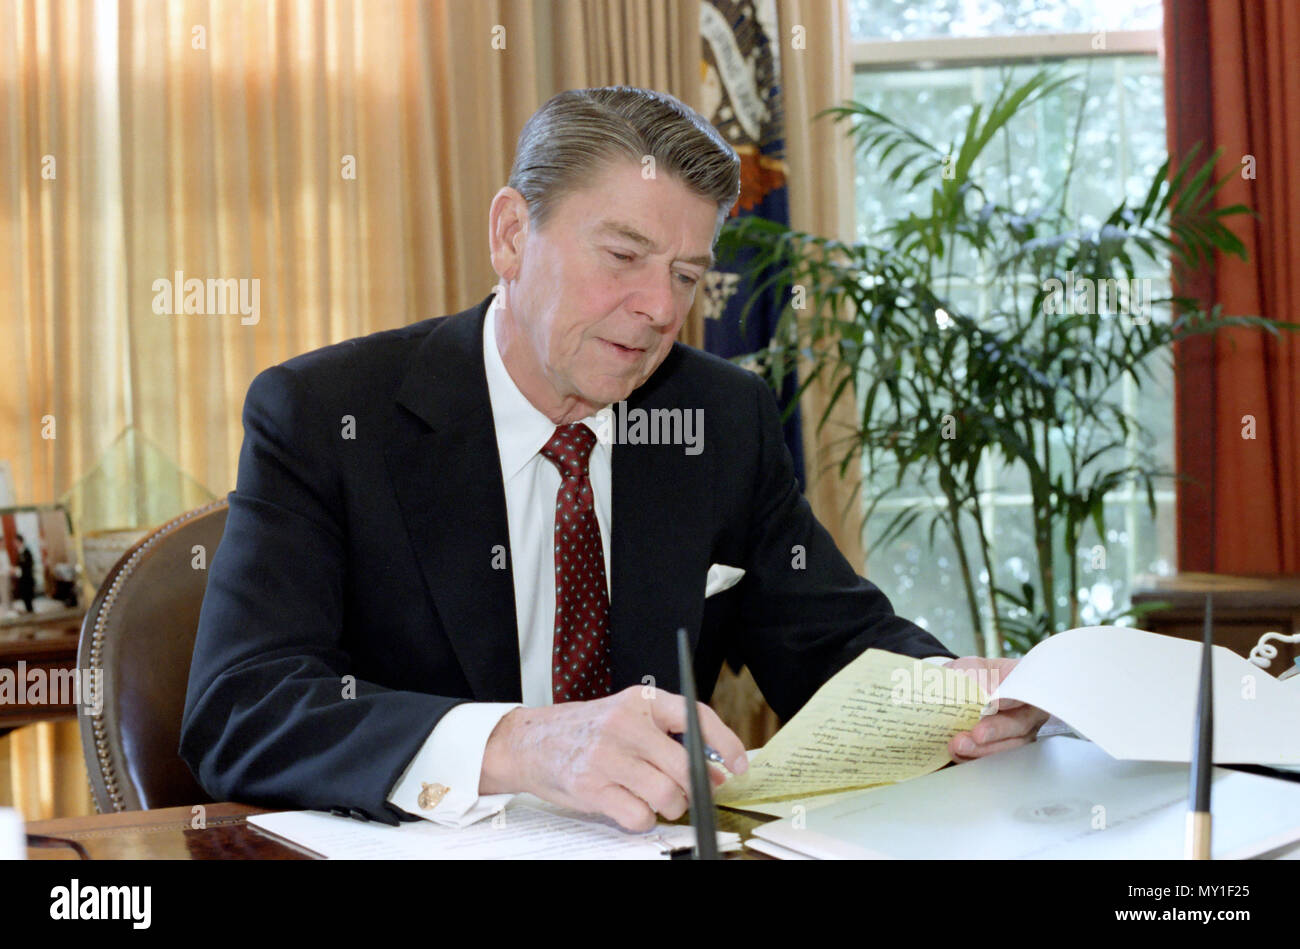 1/26/1982 President Reagan in the Oval Office working on State of the Union Speech Stock Photo